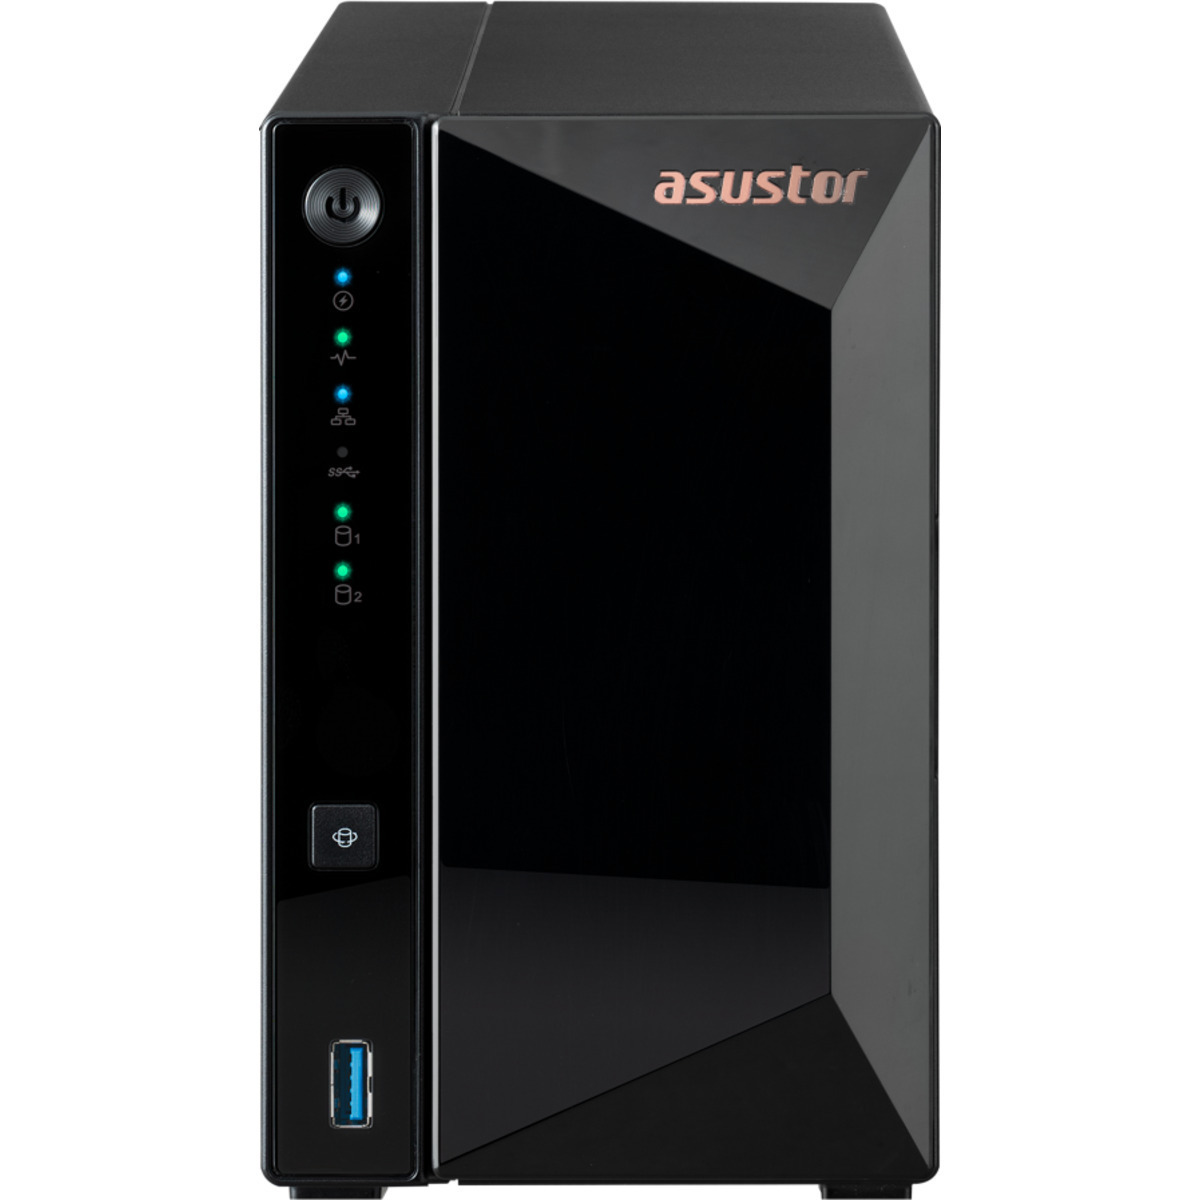 ASUSTOR DRIVESTOR 2 Pro Gen2 AS3302T v2 12tb 2-Bay Desktop Personal / Basic Home / Small Office NAS - Network Attached Storage Device 2x6tb Seagate IronWolf ST6000VN006 3.5 5400rpm SATA 6Gb/s HDD NAS Class Drives Installed - Burn-In Tested - ON SALE DRIVESTOR 2 Pro Gen2 AS3302T v2